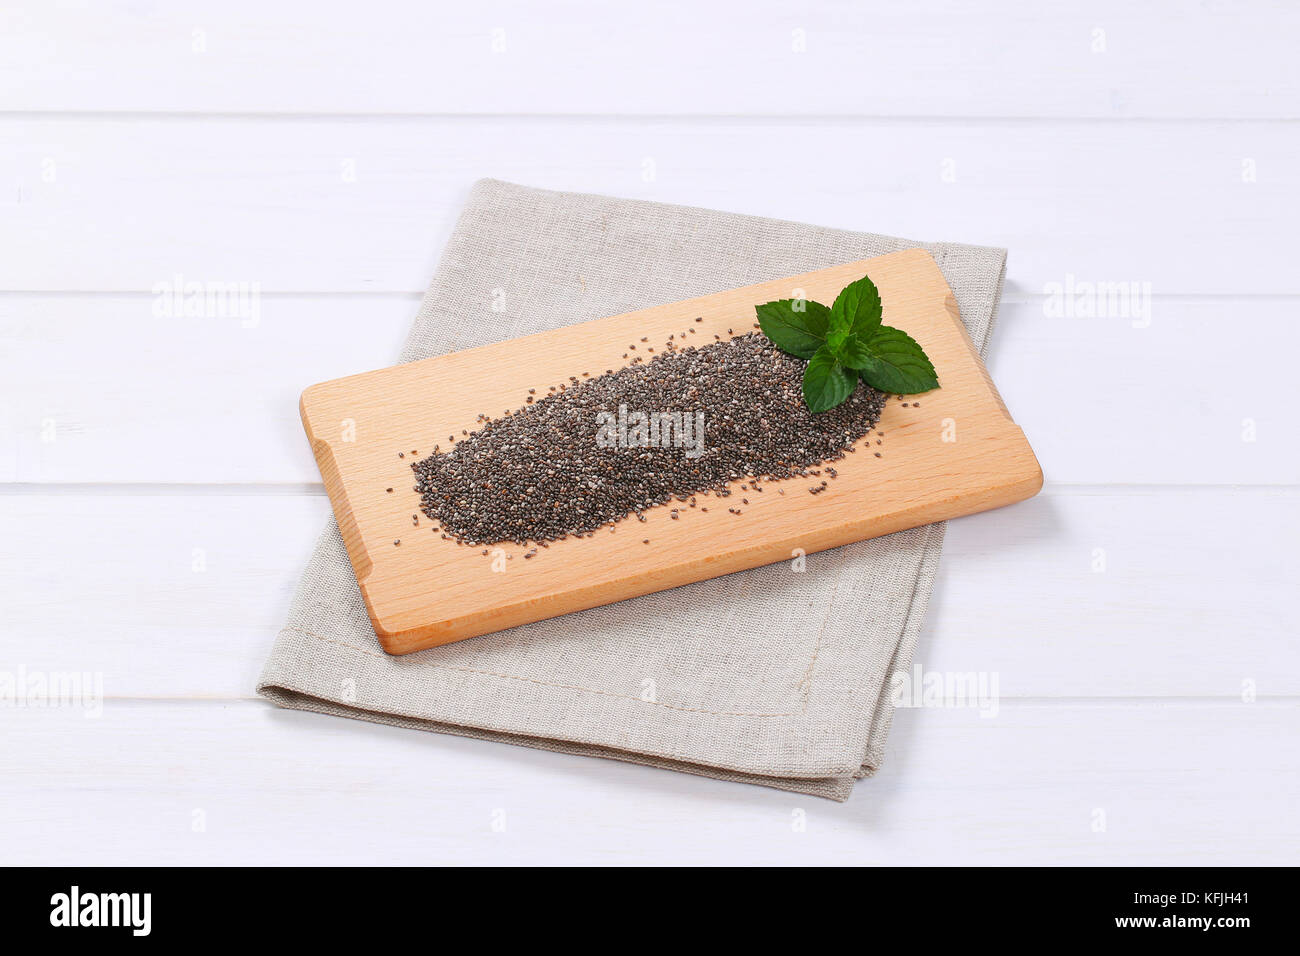 pile of chia seeds on wooden cutting board Stock Photo